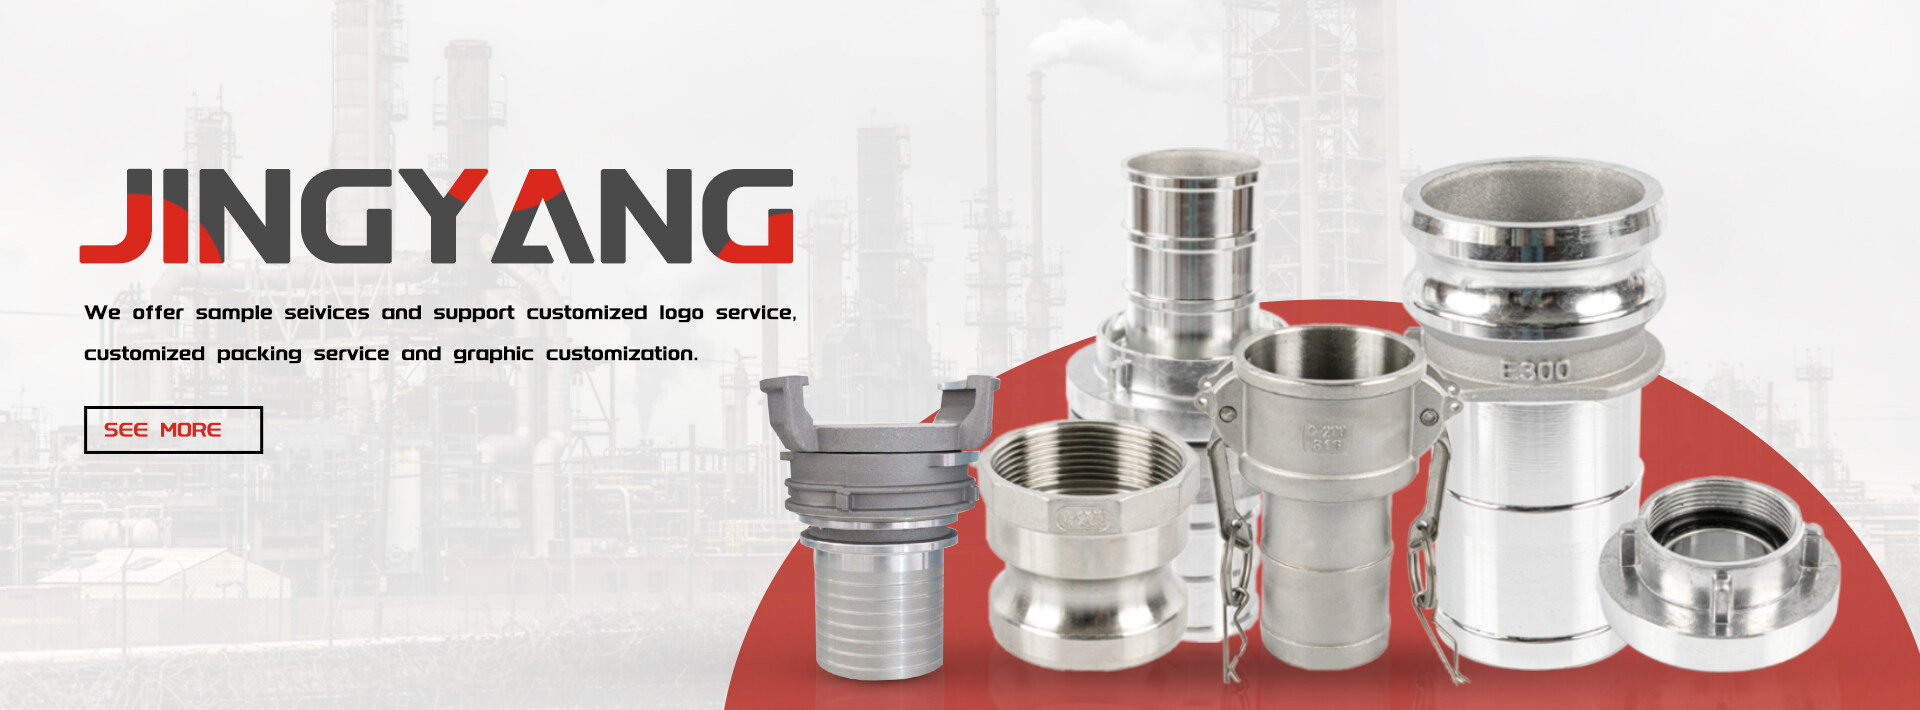 Aluminium Couplings: The Perfect Solution for Efficient Business Partnerships